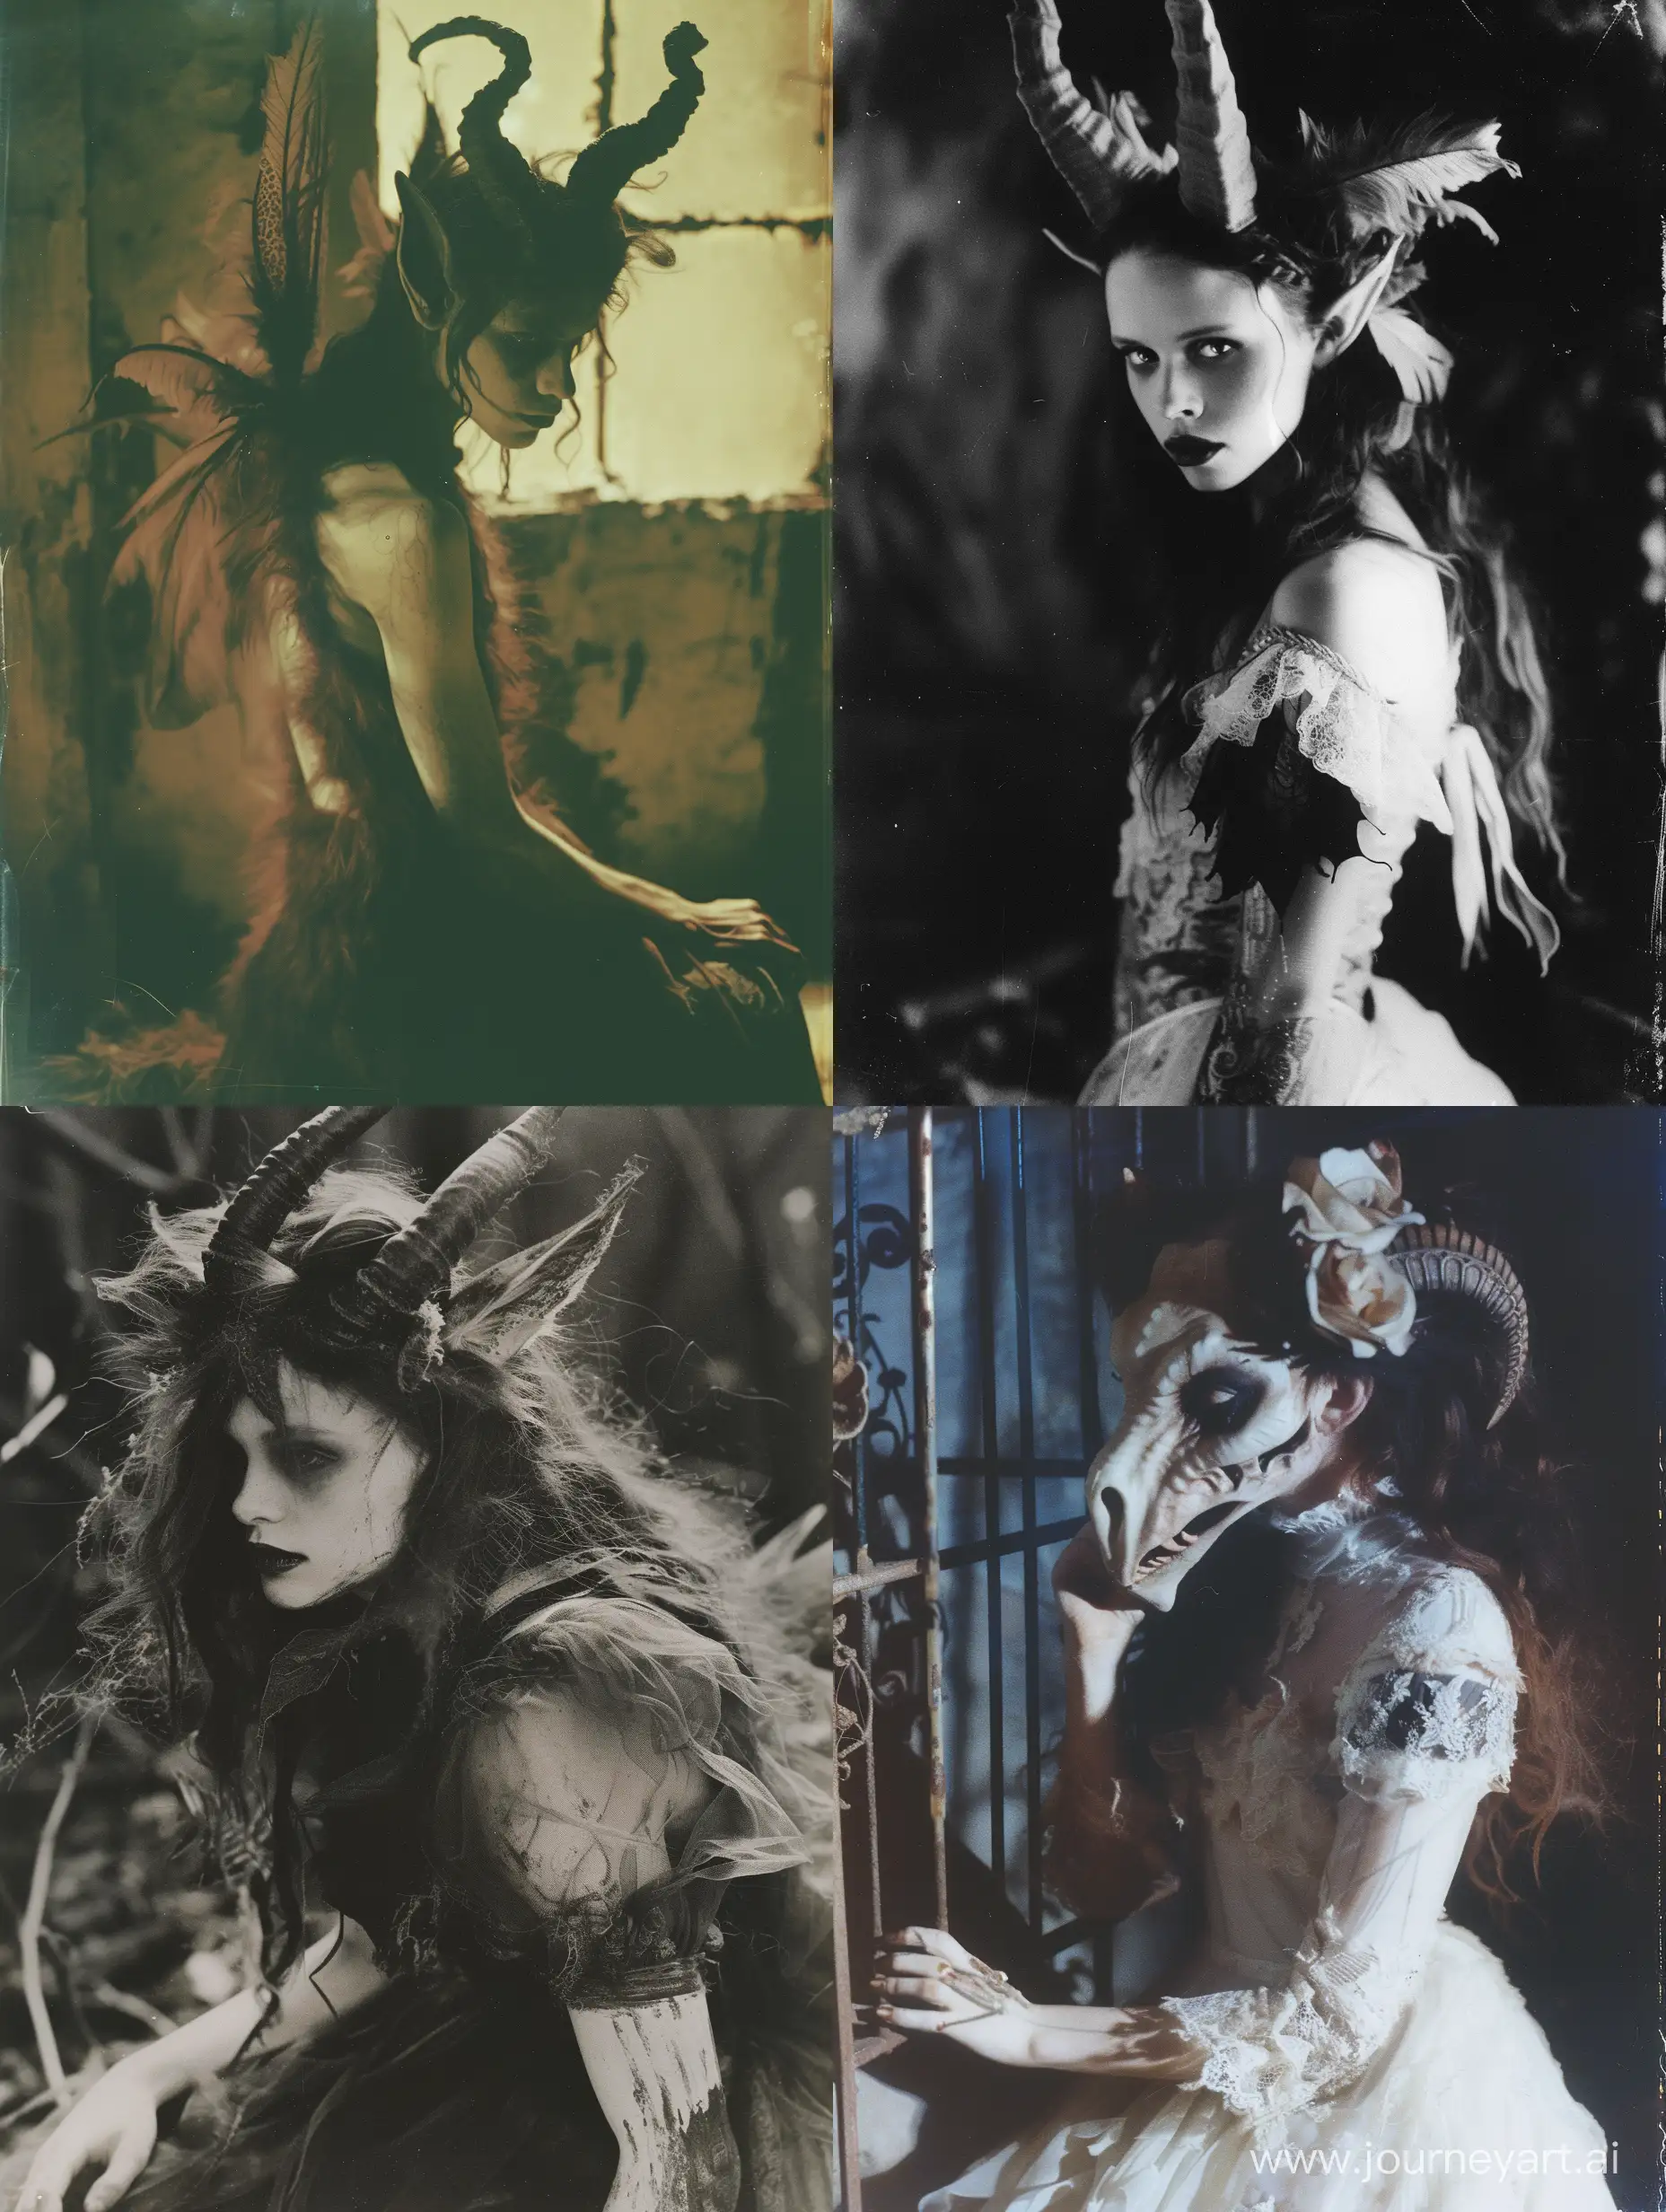 a hauntingly beautiful creature, half-human and half-beast, Fey Enigma,nBeastly Intrigue, Caged Mysterium, Kenneth anger, Nona limmen, William Mortensen, horror core, dark aesthetic, expired 35mm film